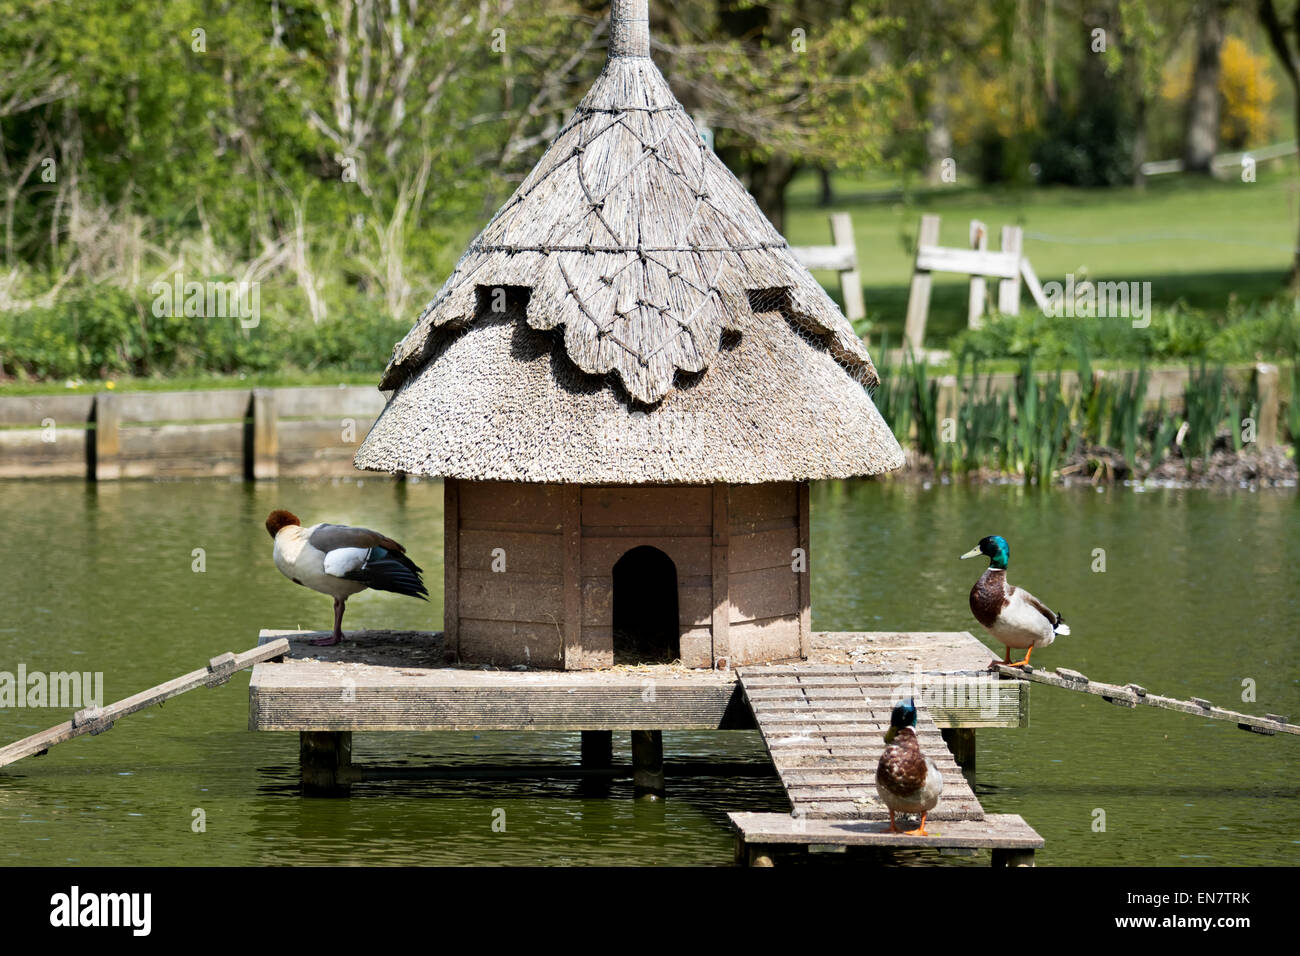 Ducks on a duck house in a village pond Stock Photo